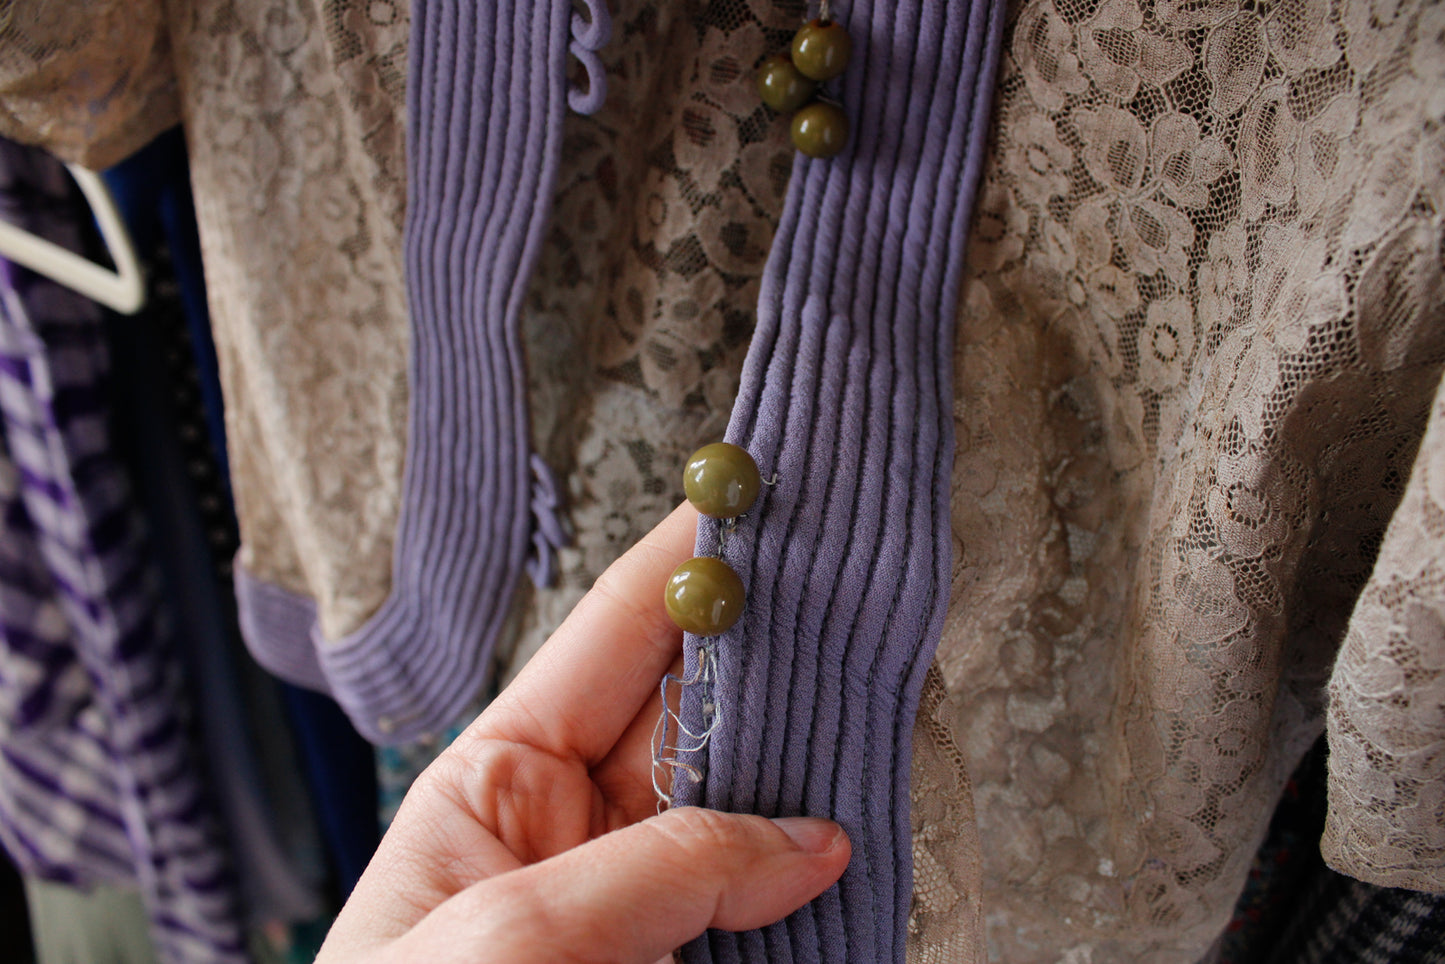 1930s Lace Purple Blouse with Bakelite buttons - Small